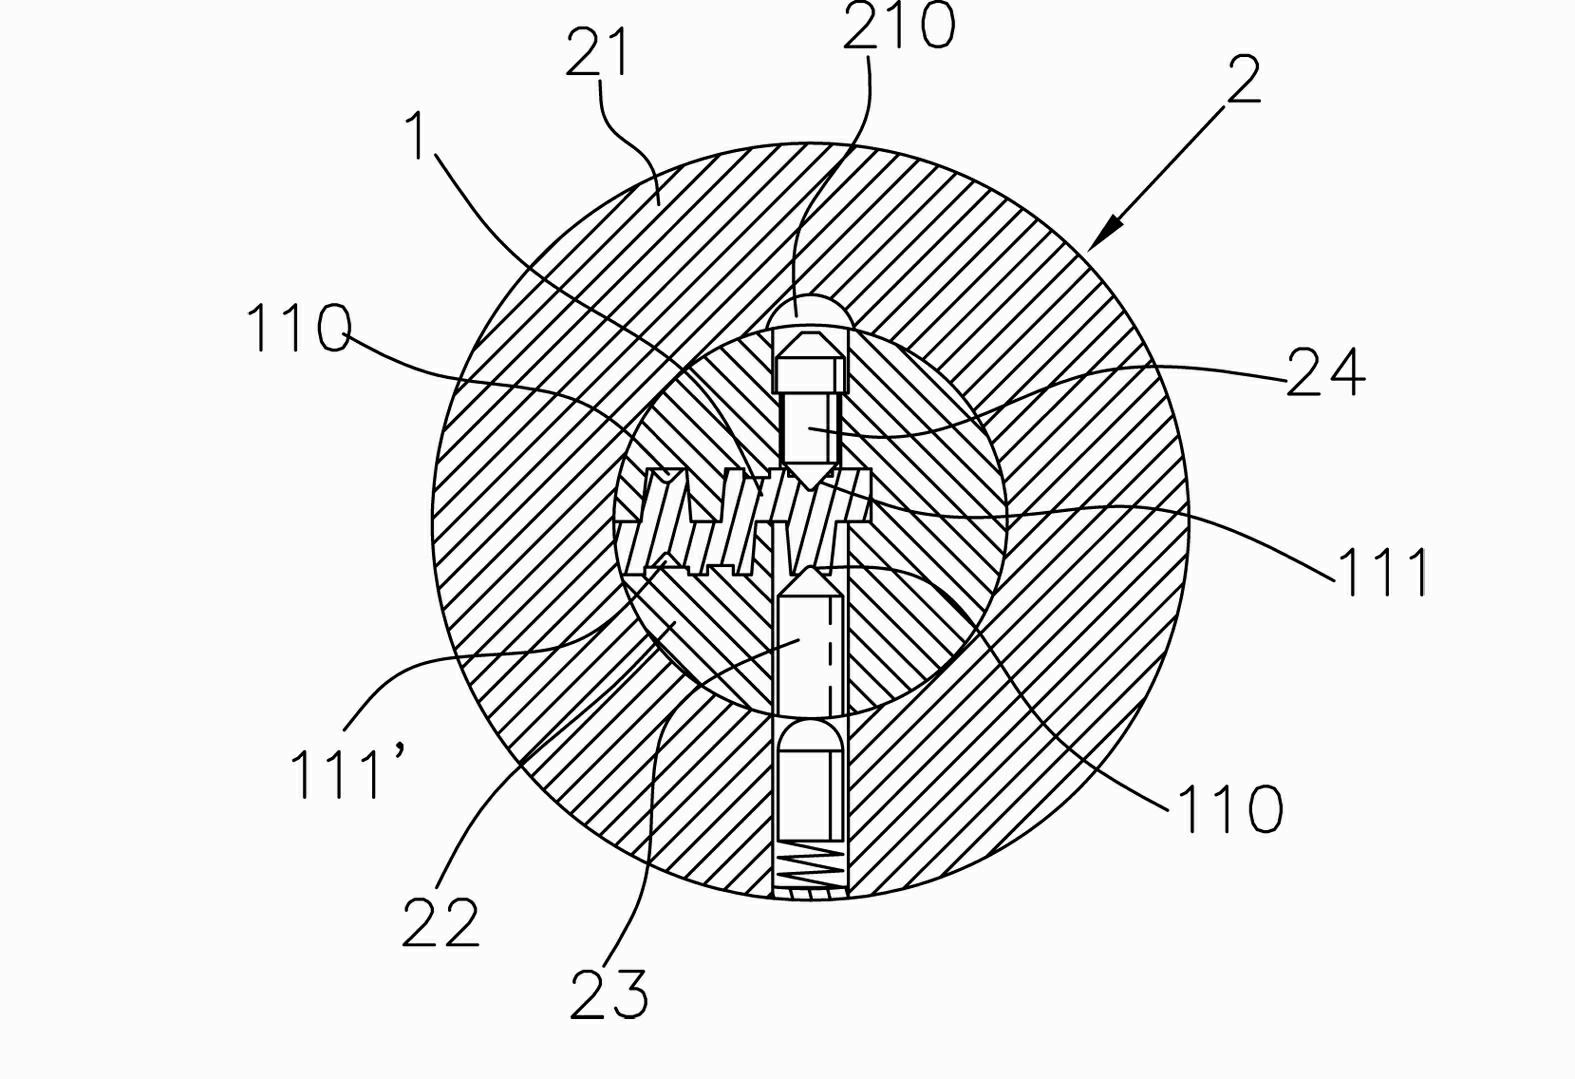 Method for locking and unlocking a plurality of locks by single key and structure of lock for realizing method